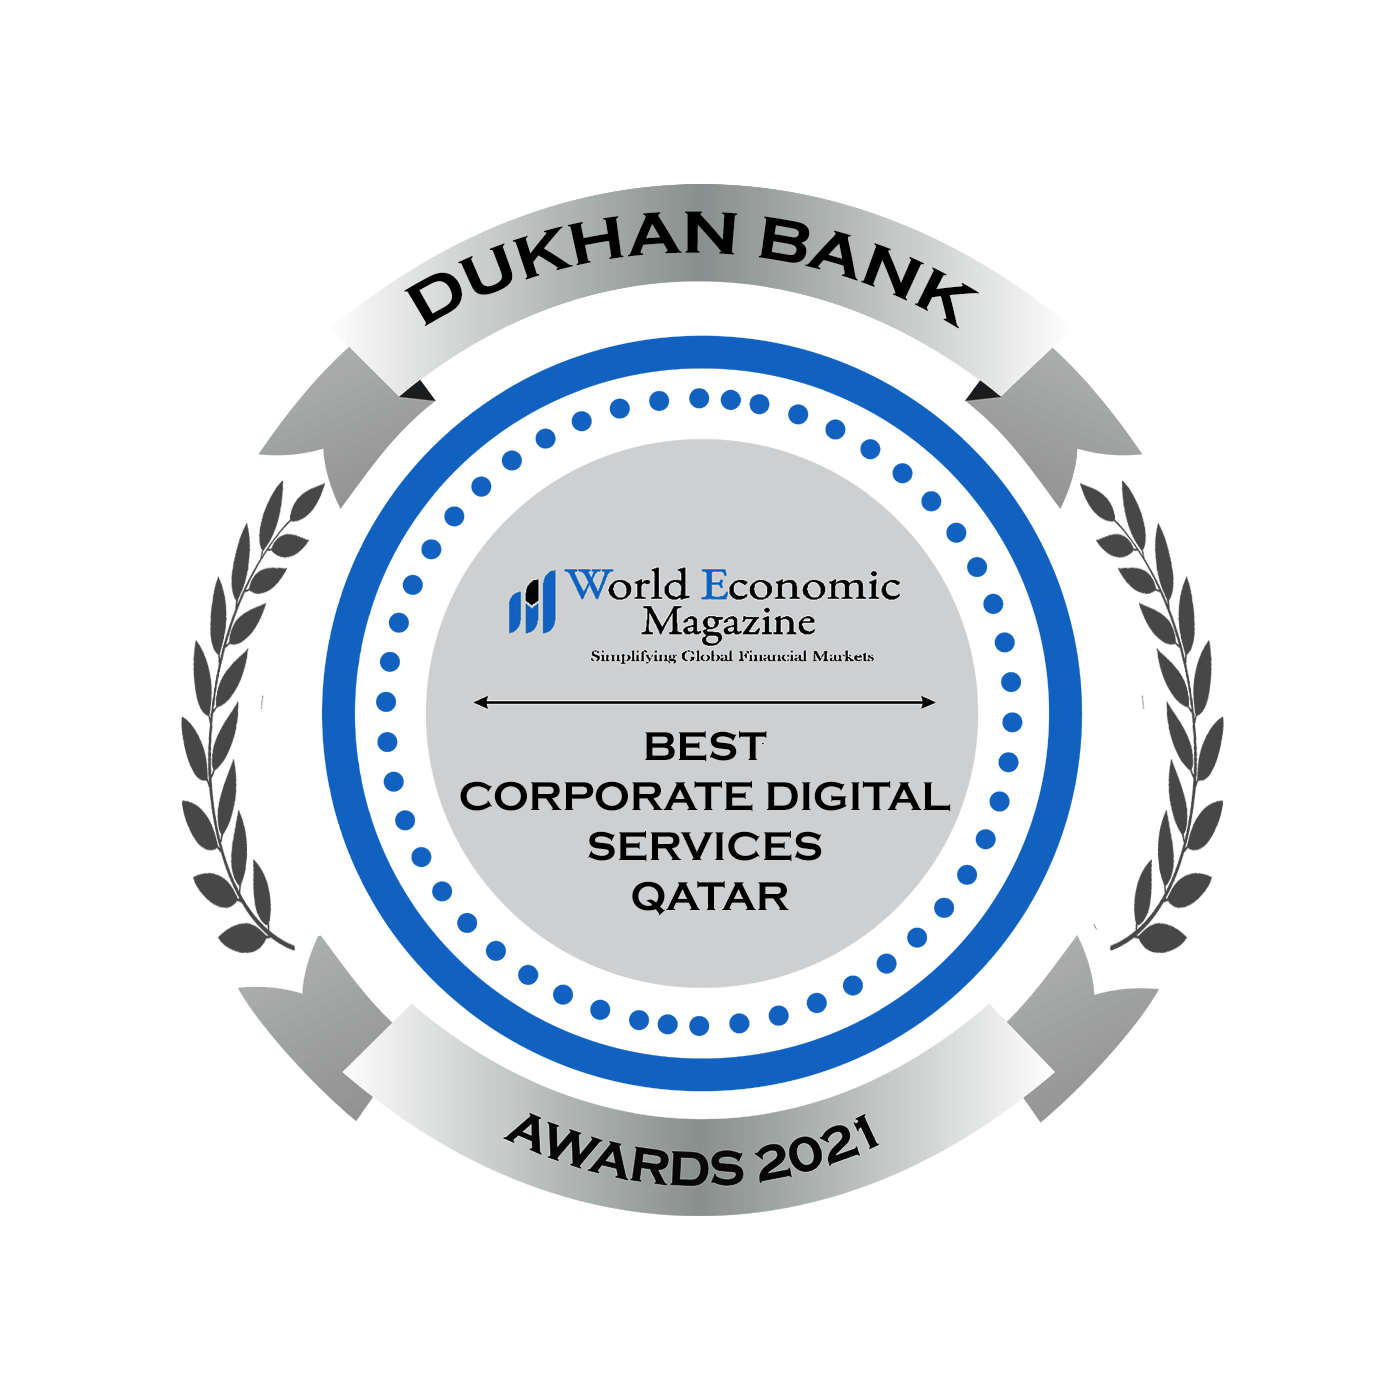  DUKHAN BANK WINS TWO AWARDS FROM THE WORLD ECONOMIC MAGAZINE FOR ITS INNOVATIVE AND OUTSTANDING BANKING SERVICES